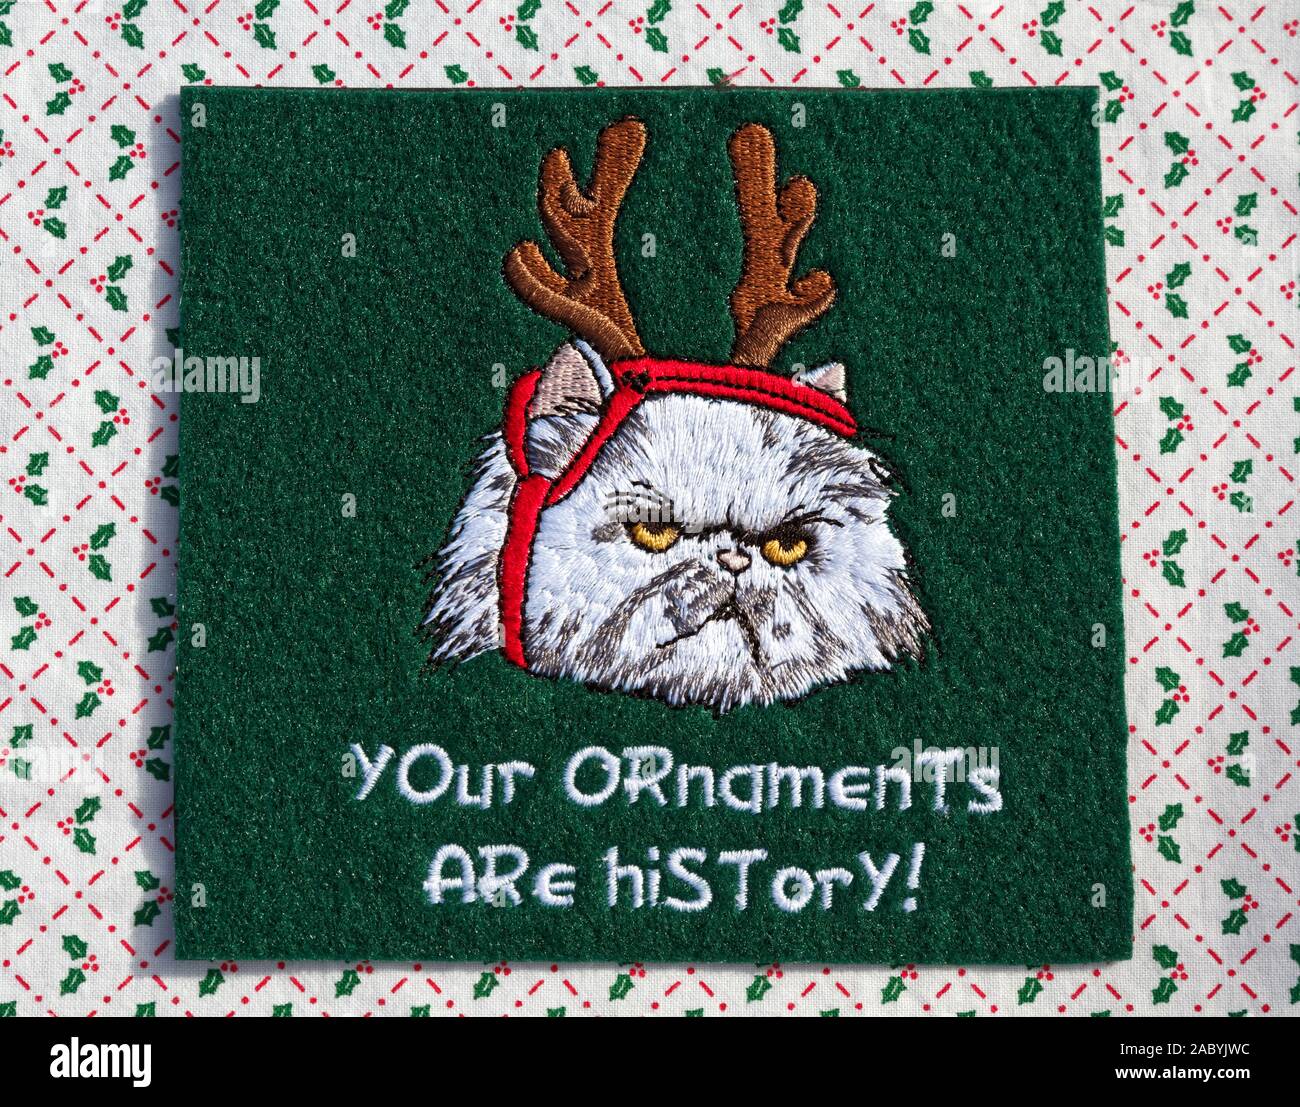 Christmas decoration, mad cat, reindeer antlers strapped on, words 'Your ornaments are history!', humorous, embroidery, holiday, horizontal Stock Photo